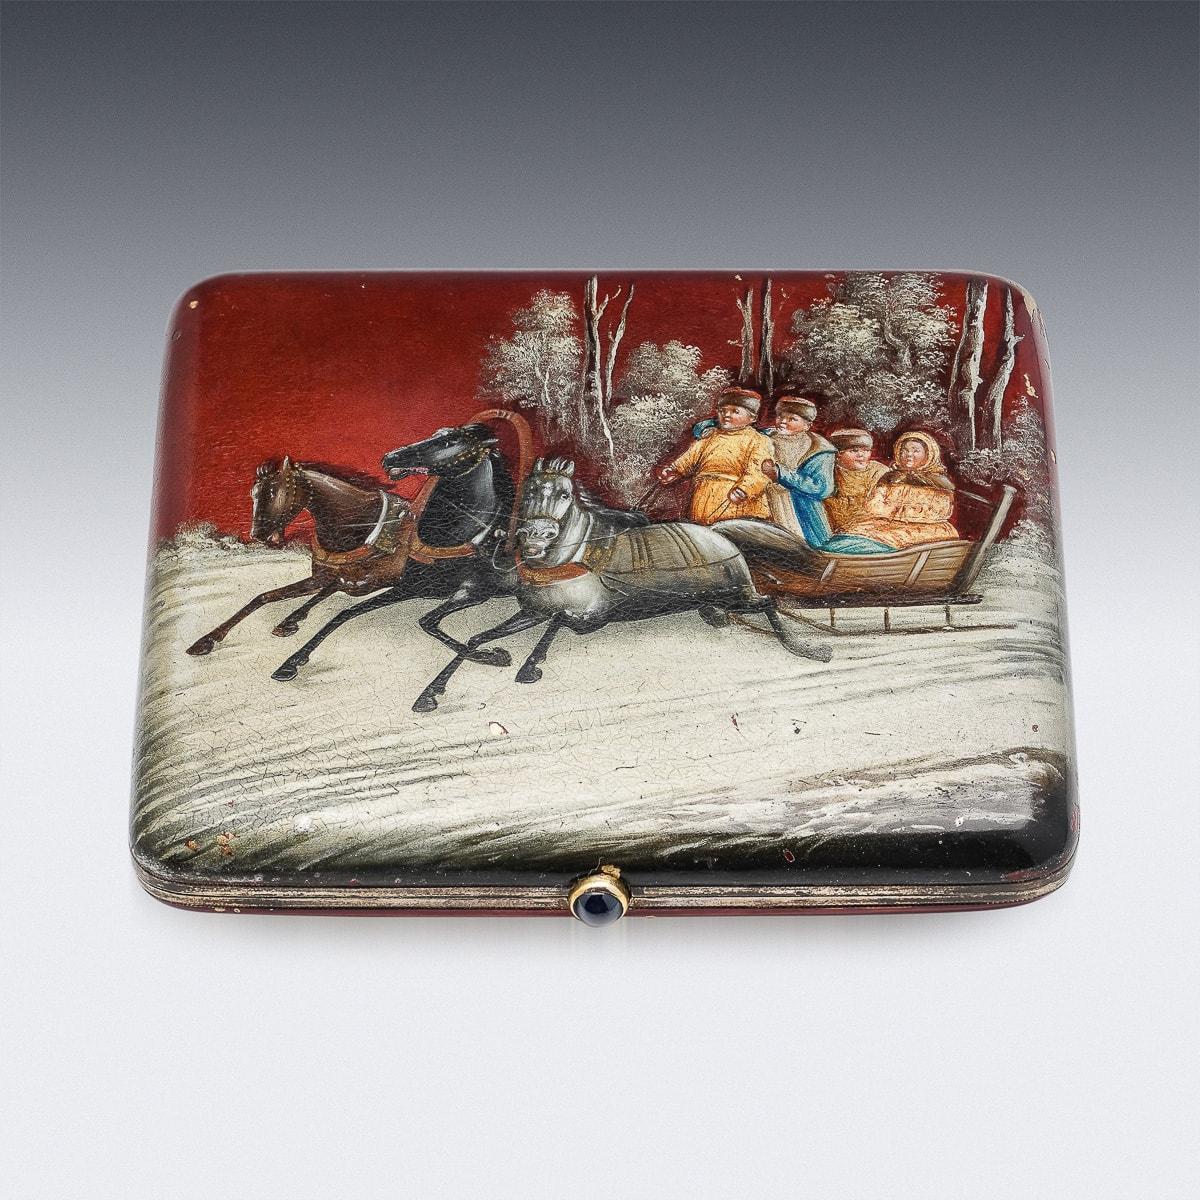 Antique early 20th Century Russian solid silver & hand painted lacquered cigarette case. Stunning quality, richly parcel gilt, the cover depicting a troika of horses pulling a sleigh with a family thought the snow covered forest. Very high quality